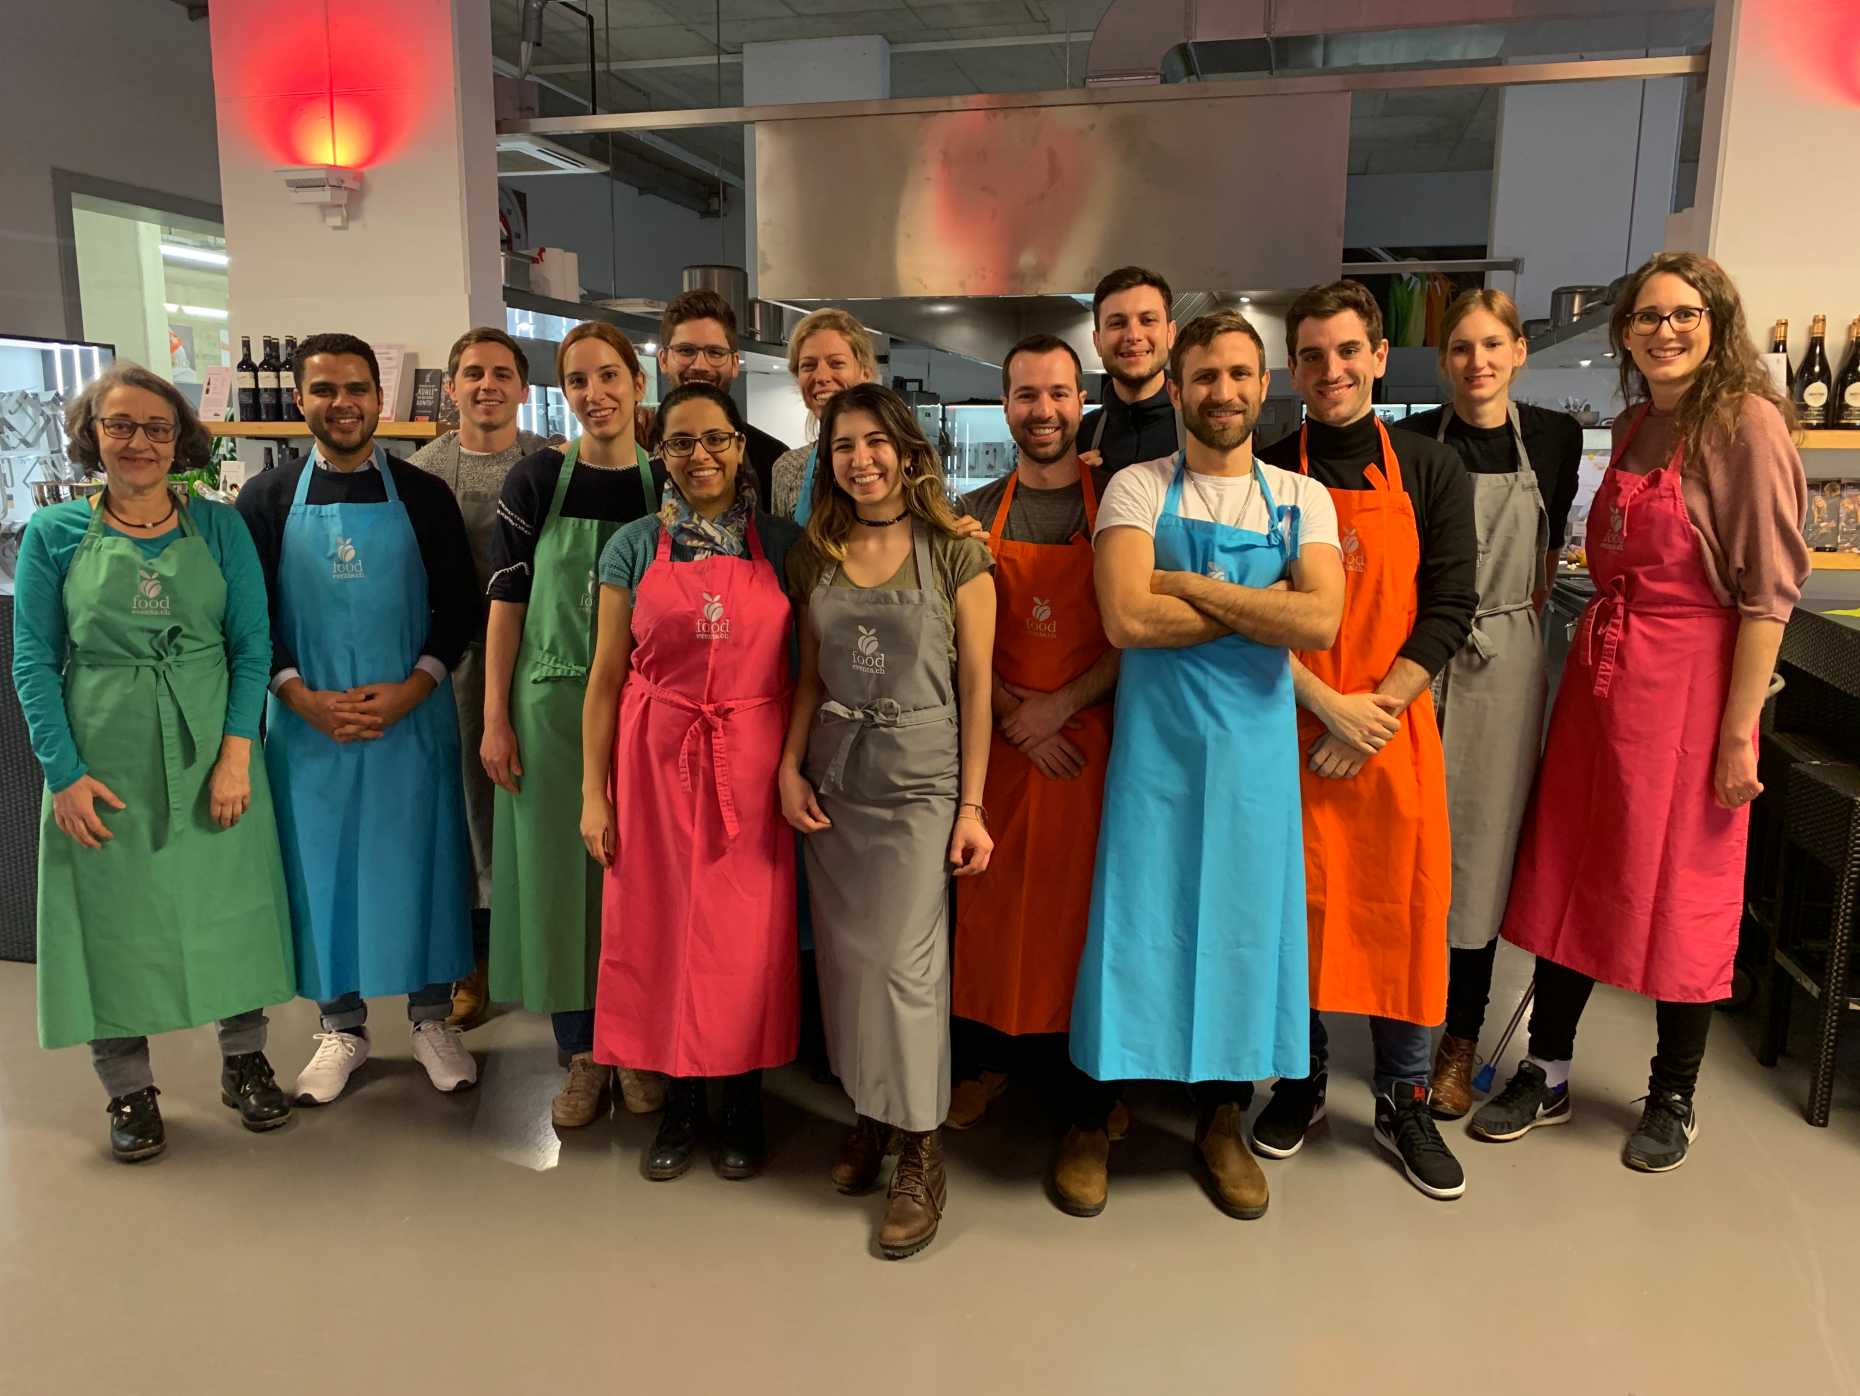 Enlarged view: Team cooking event